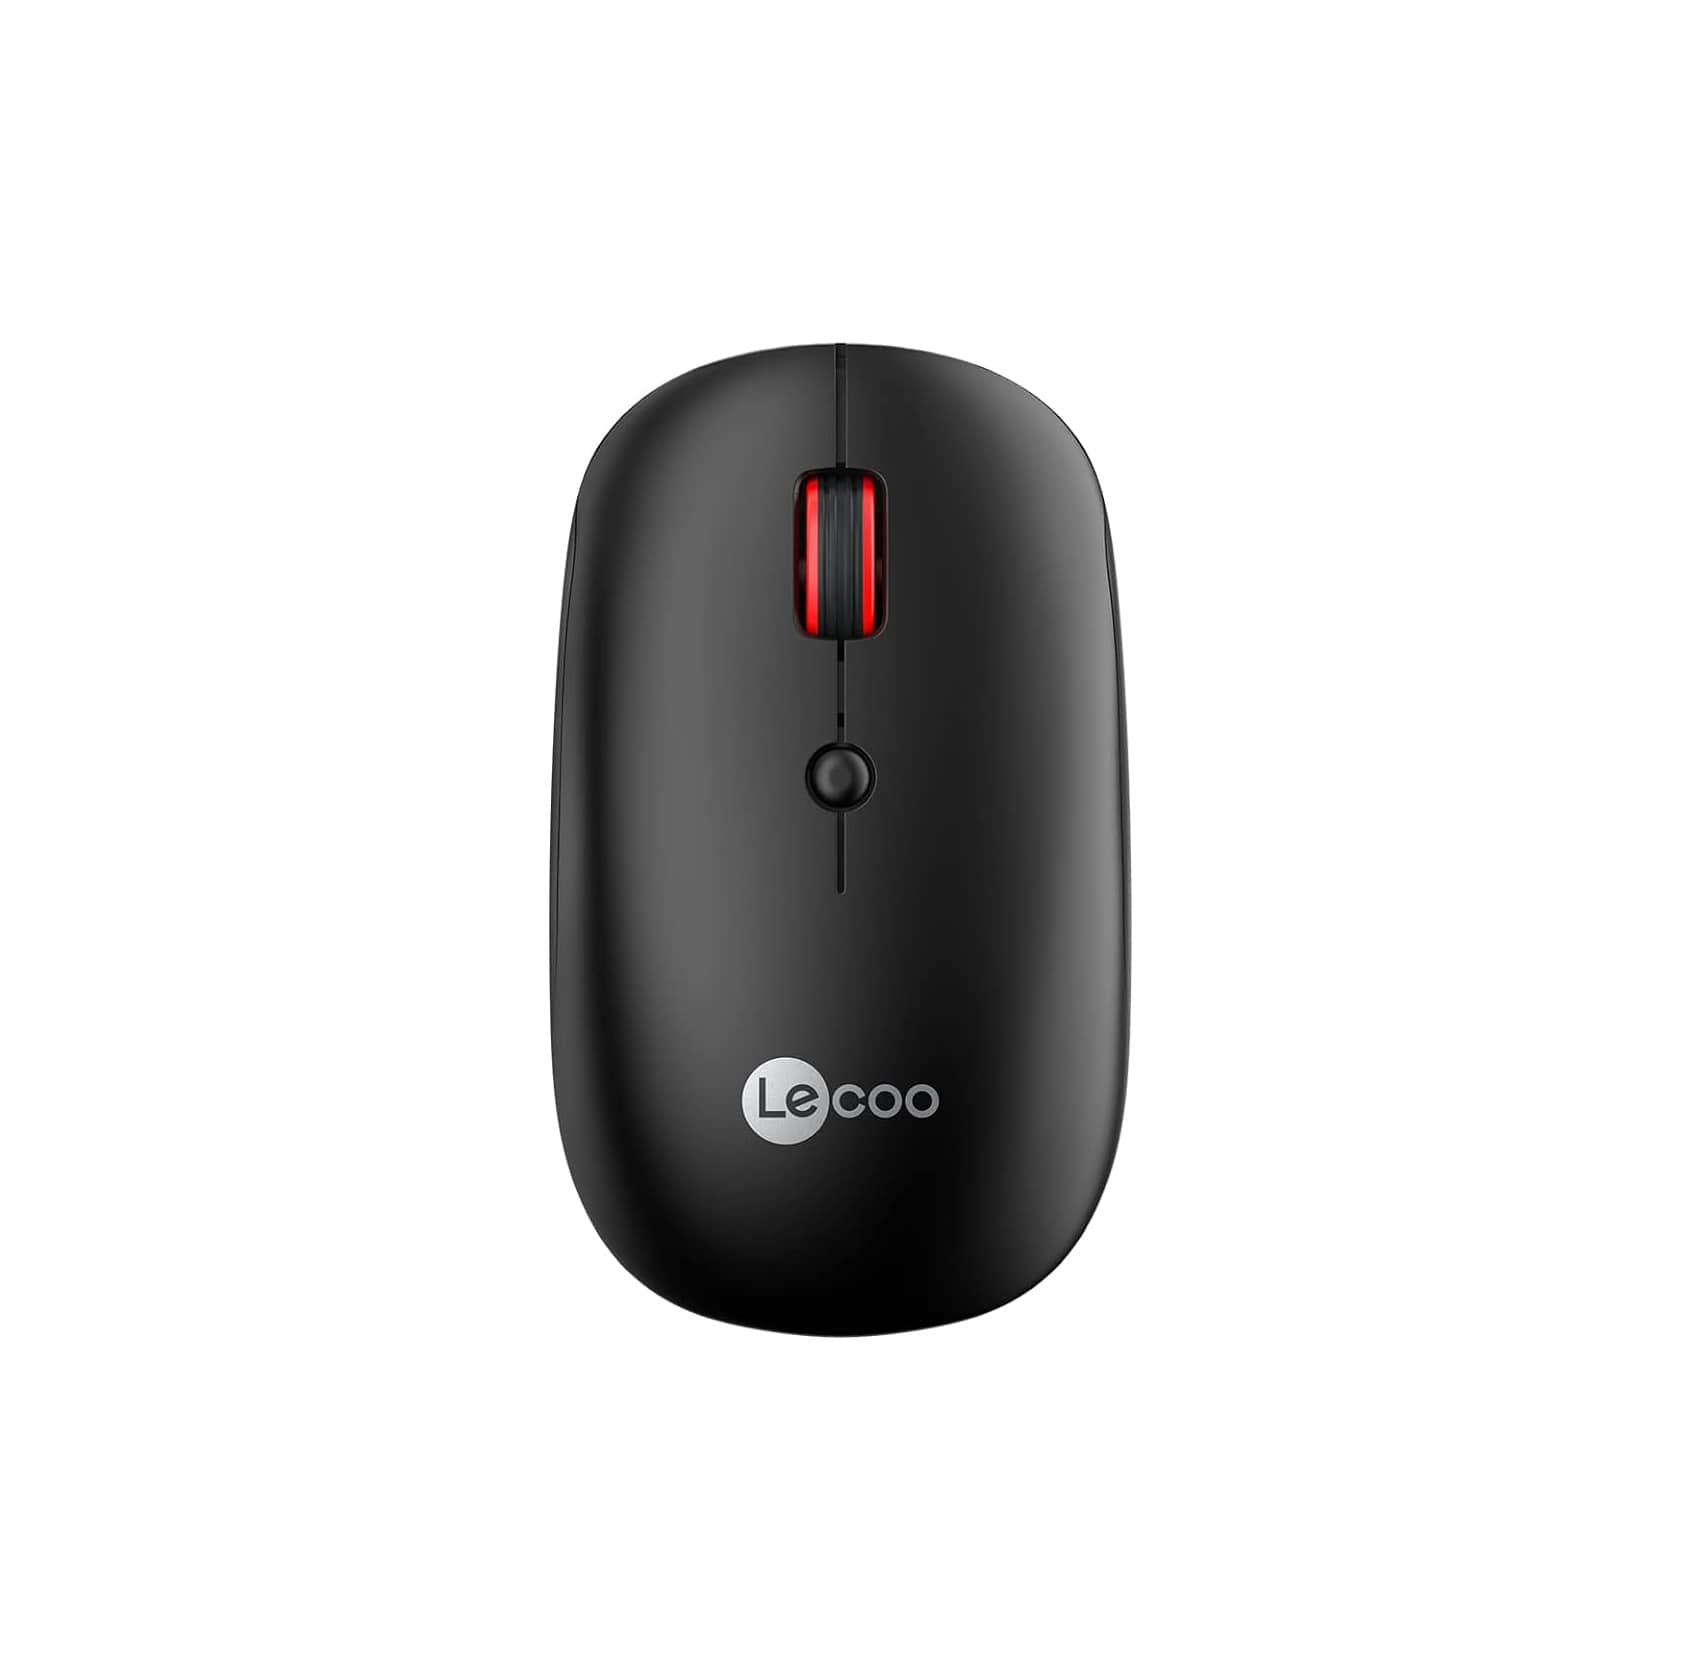 Lecoo by Lenovo WS211 Wireless Rechargeable 2.4Ghz and Bluetooth Mouse   |  Computer Accessories  |  Mouses  |  Wireless Mouses  |